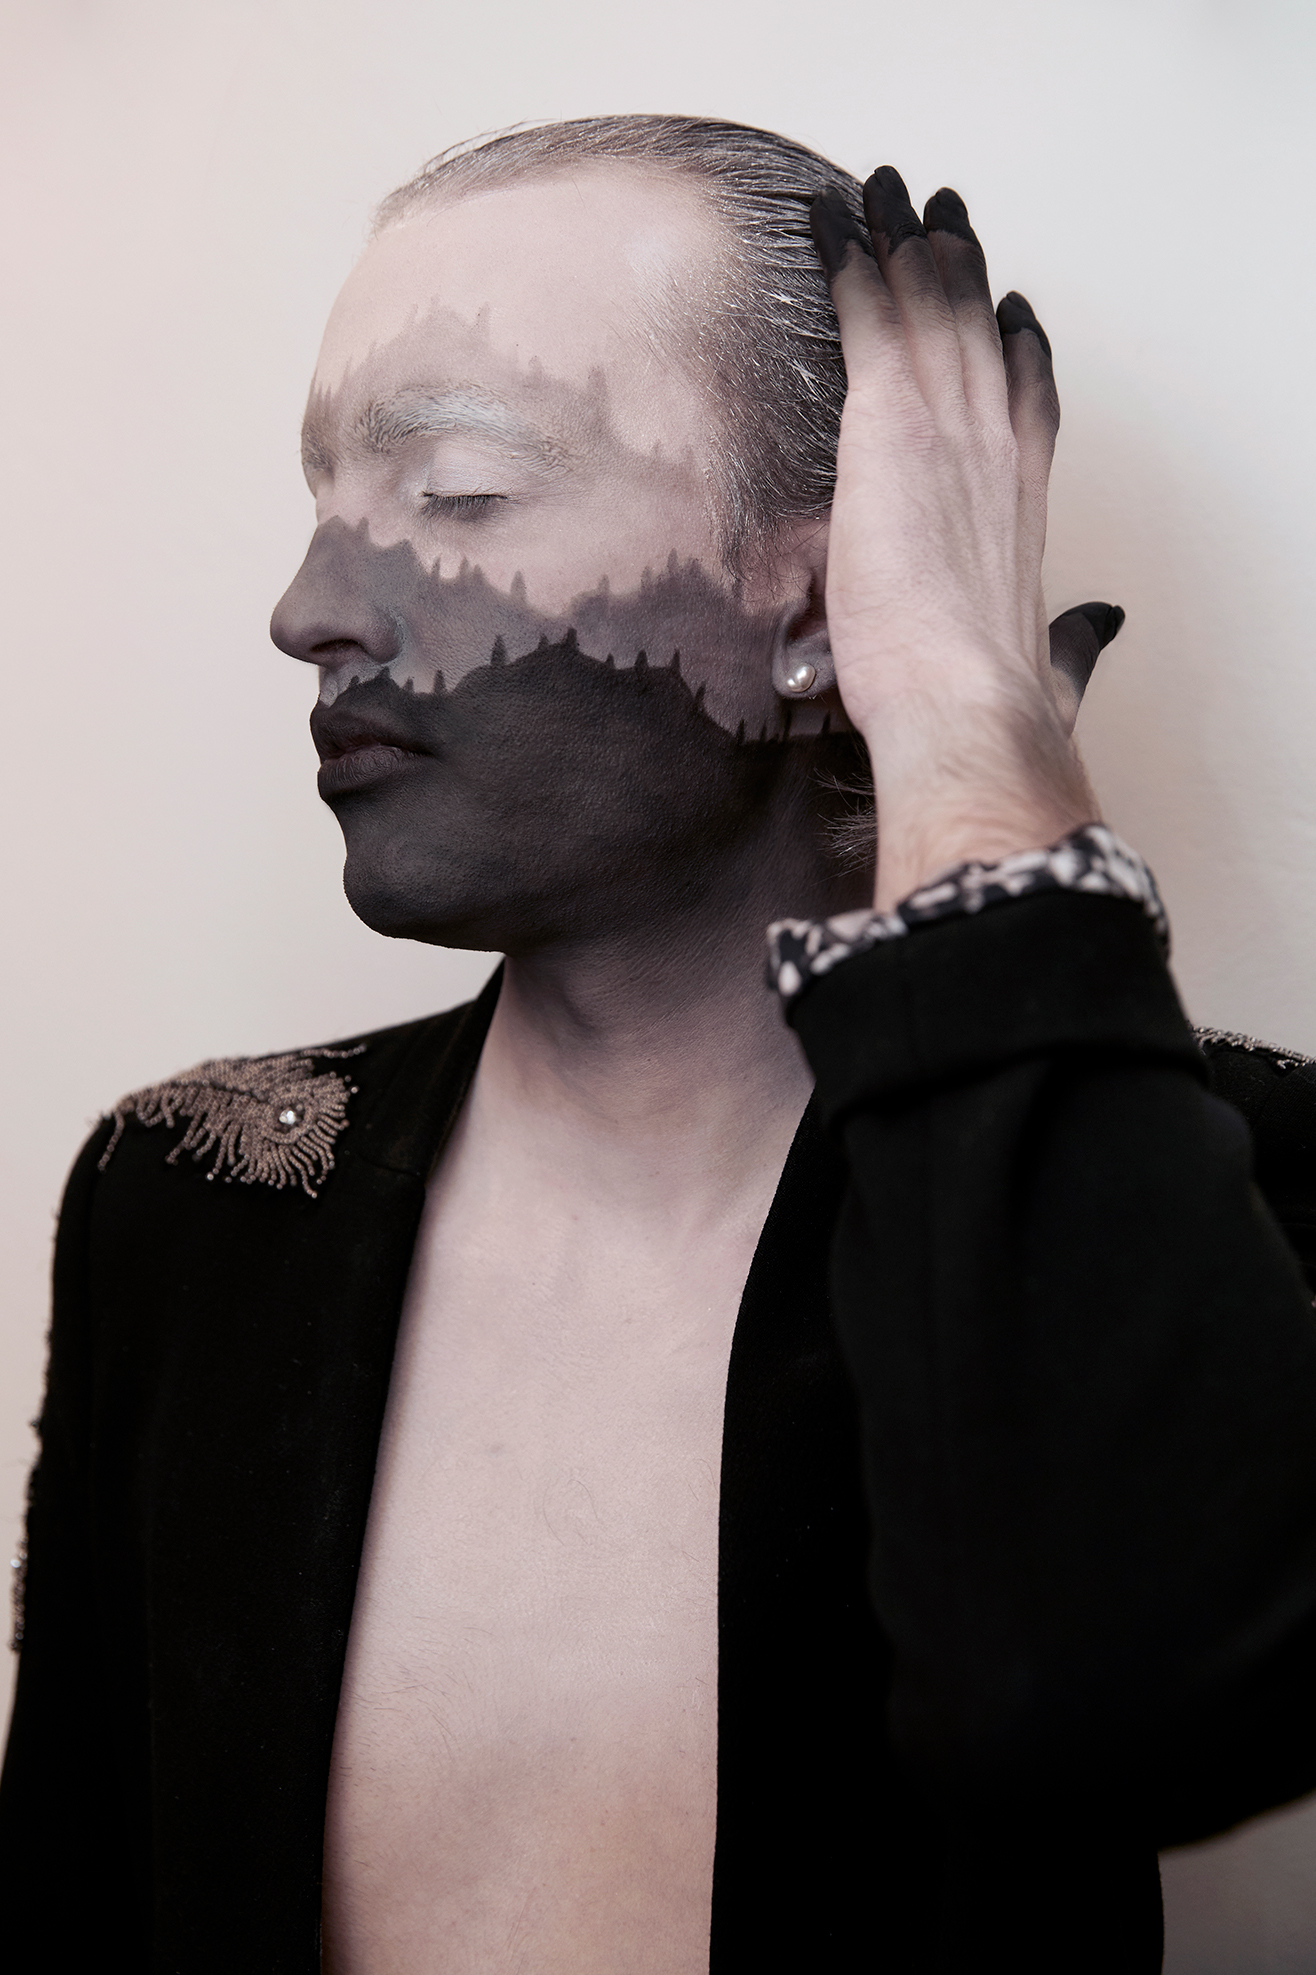 Jesse Clark posing his hand on one side of his head with black and white facepaint that resembles a mountain range against a white background